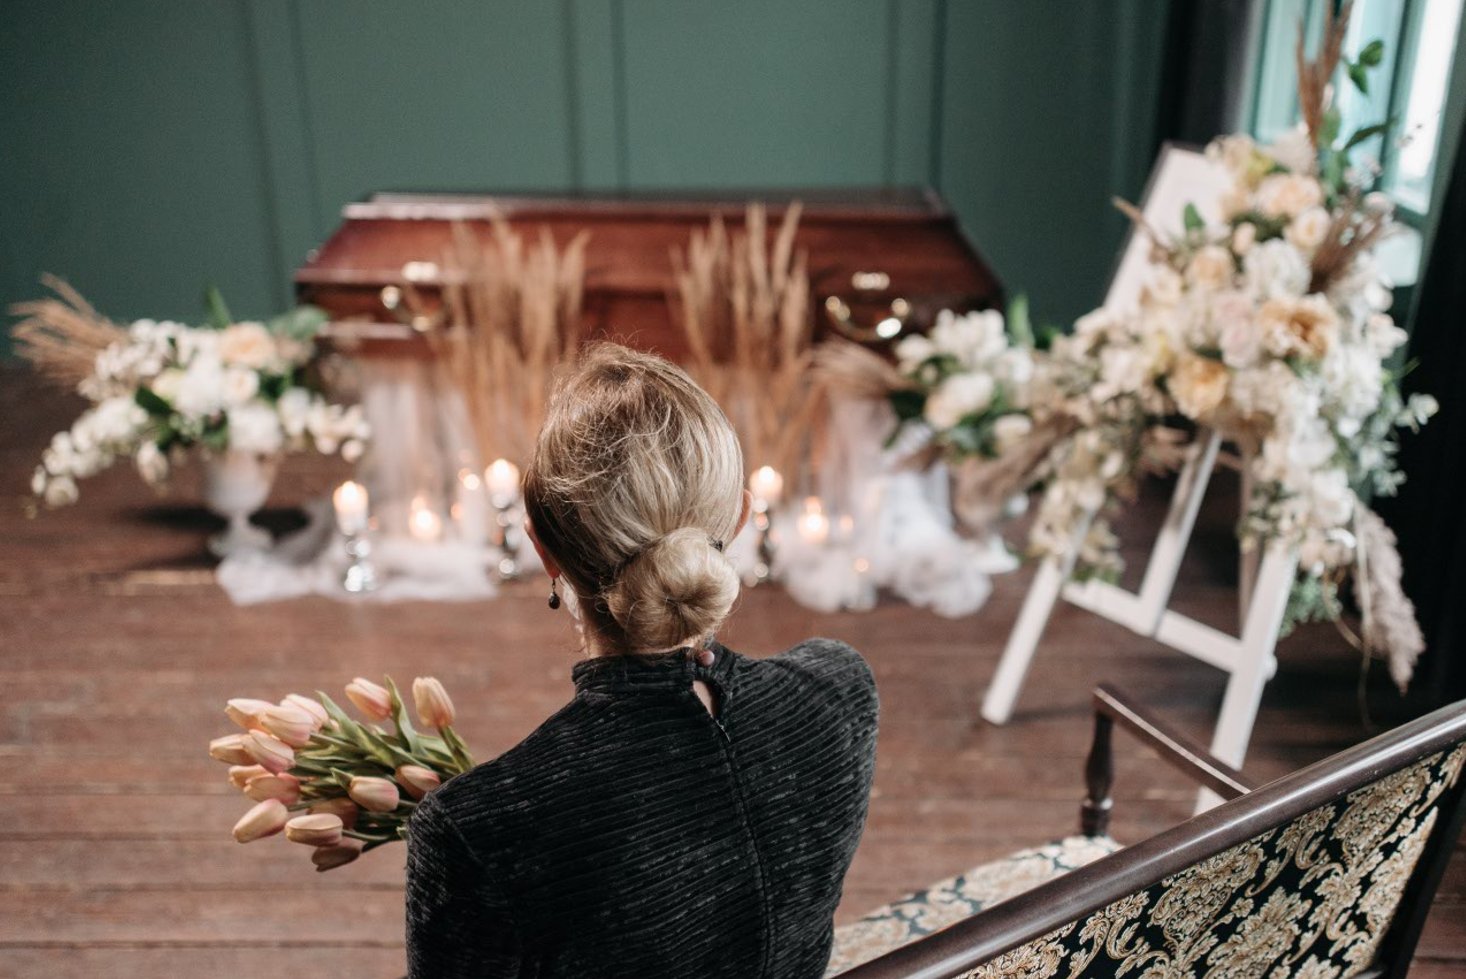 How to Choose Meaningful Funeral Wreaths for a Loved One